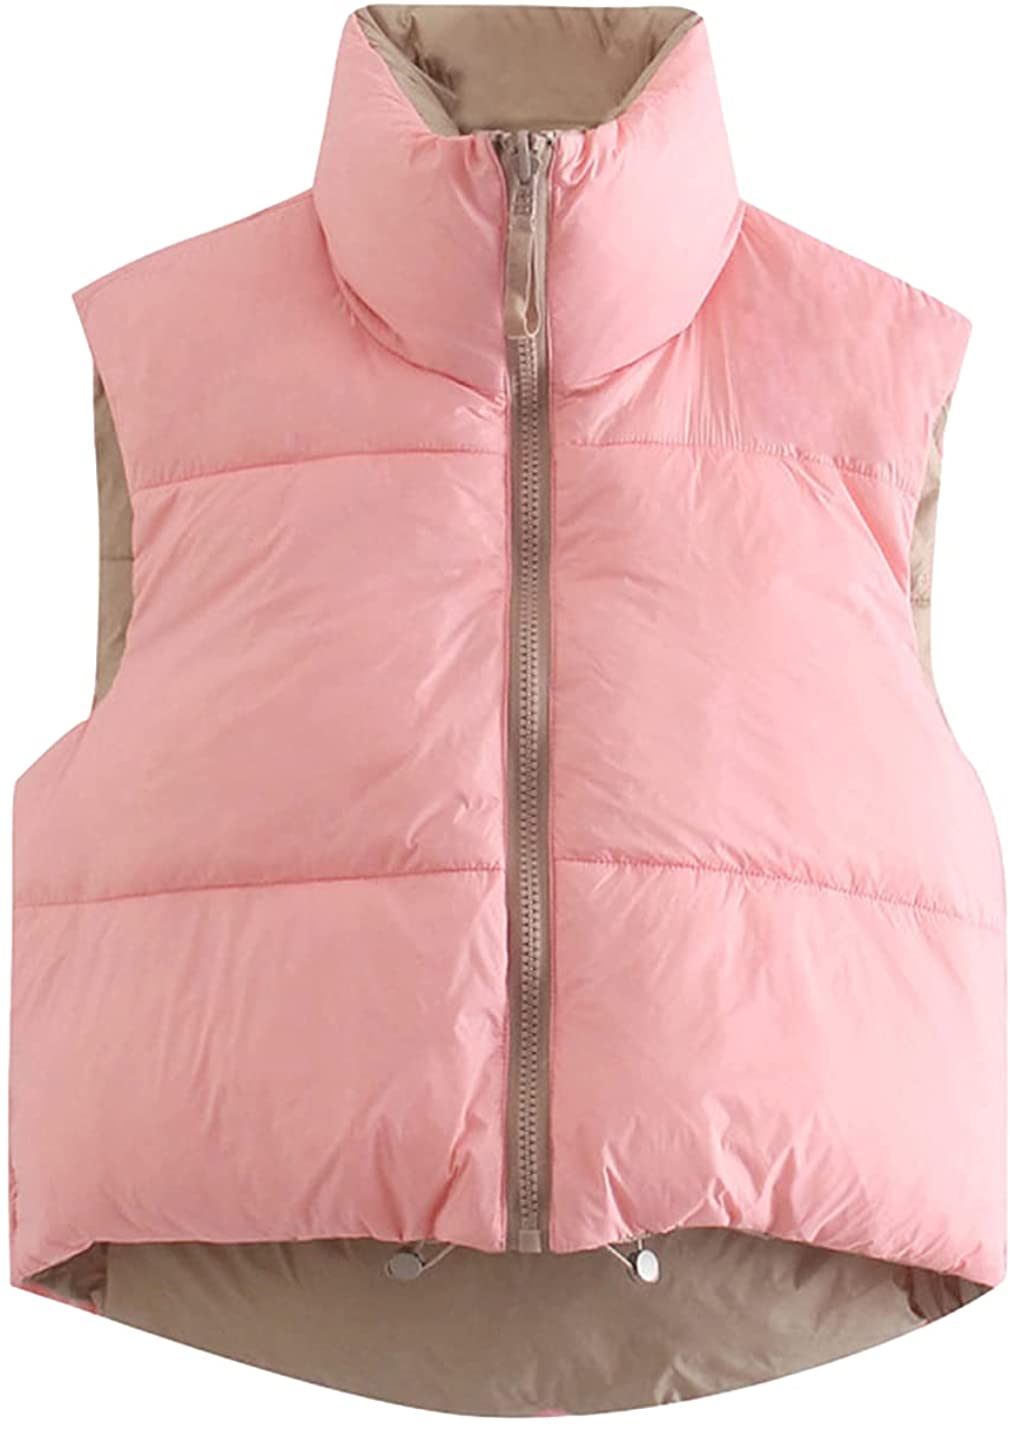 ✨Do's and Don'ts Crop Puffer Vest #croppuffervest #croppufferjacket #c, Cropped  Puffer Vest